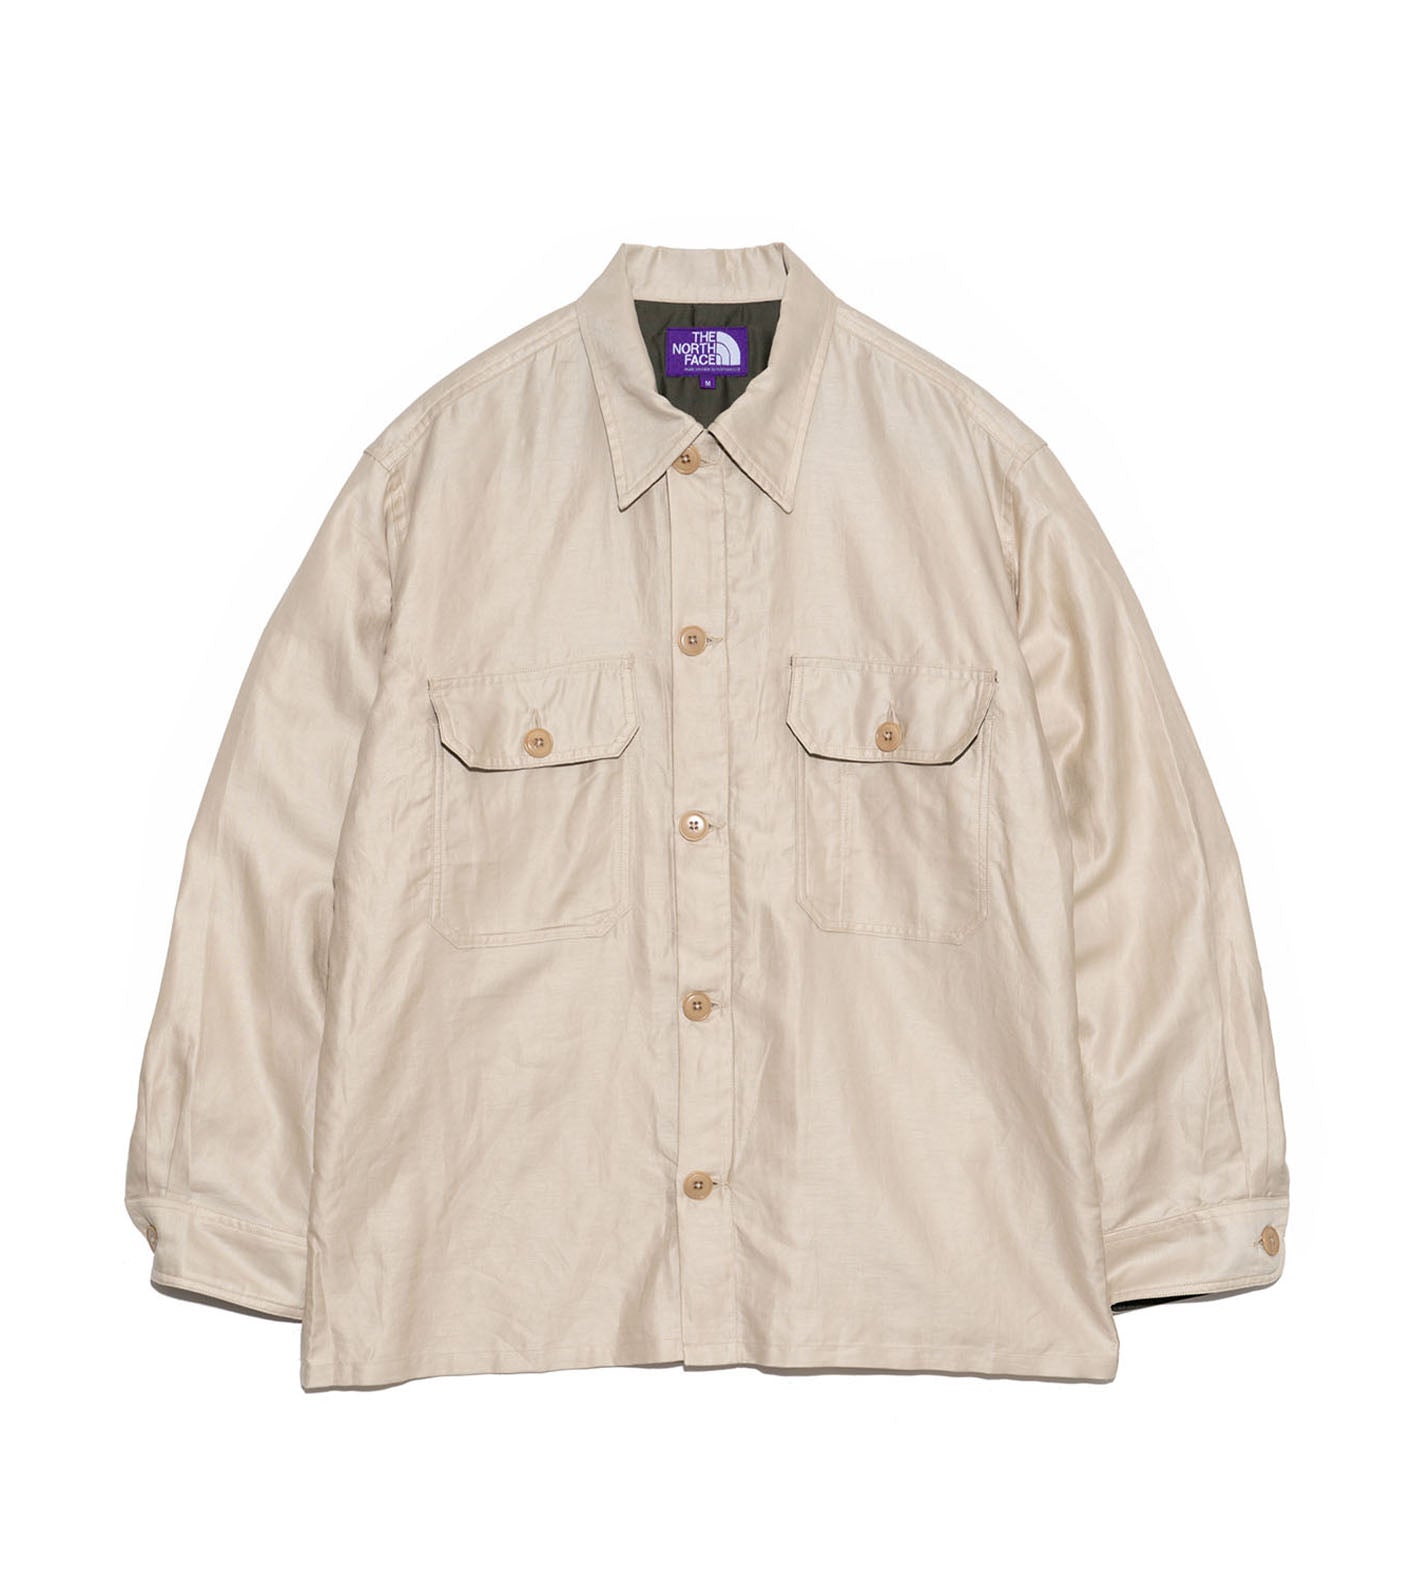 THE NORTH FACE PURPLE LABEL Moleskin Field Shirt Jacket – unexpected store